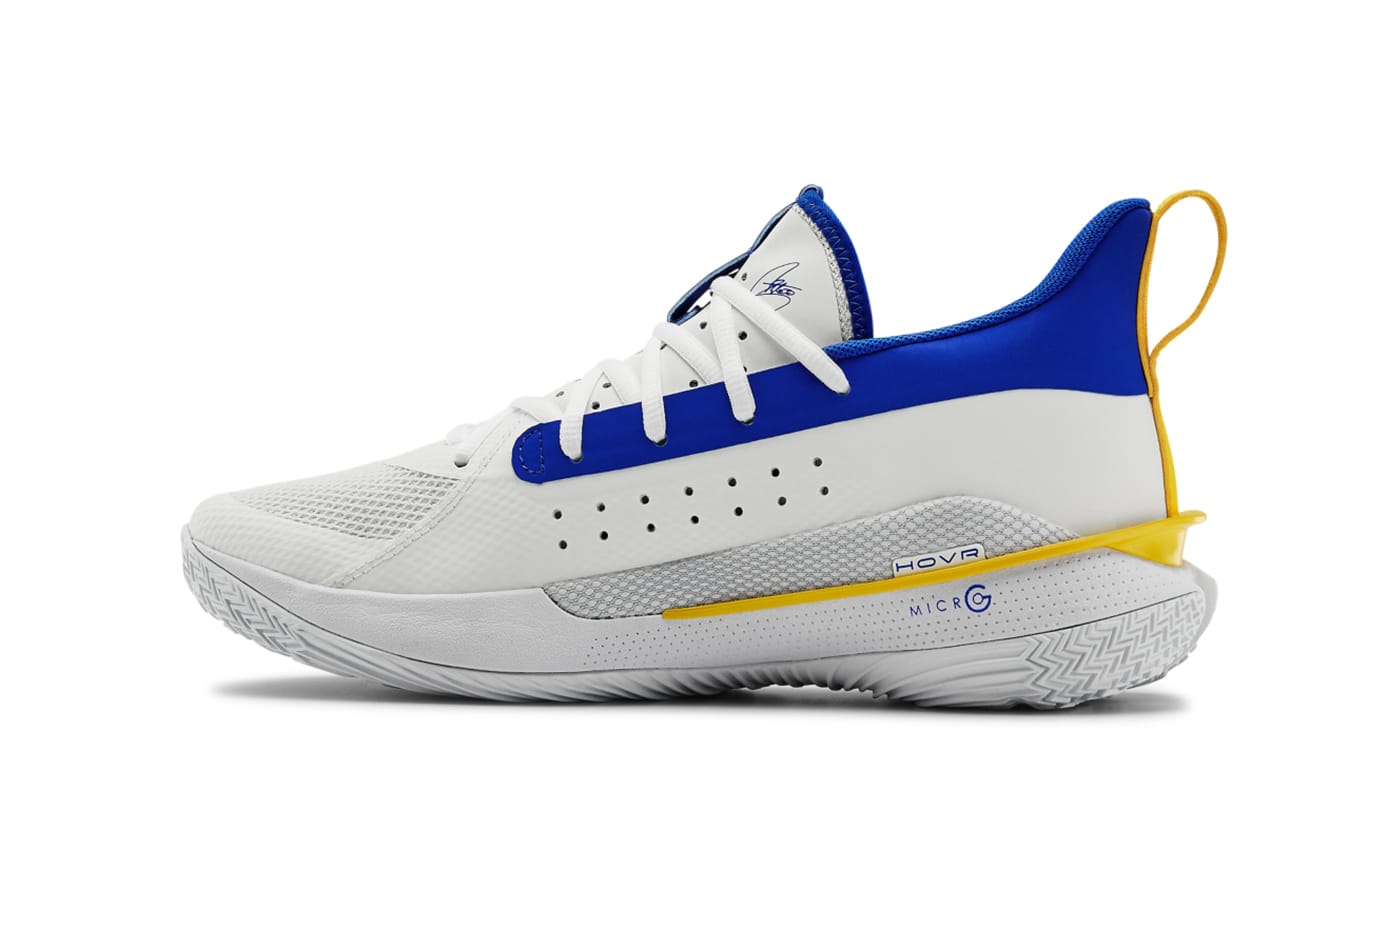 under armour golden state warriors shoes